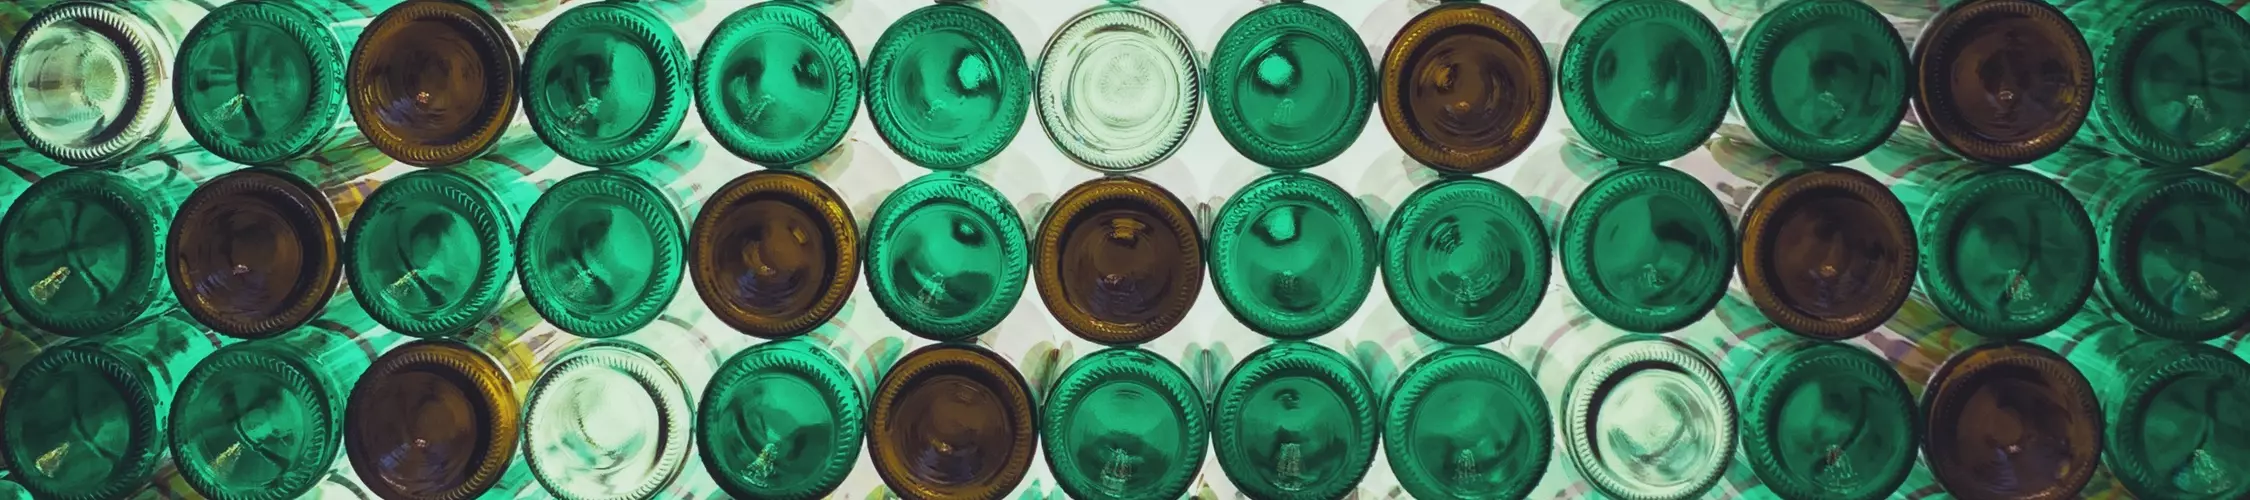 green and brown glass bottles